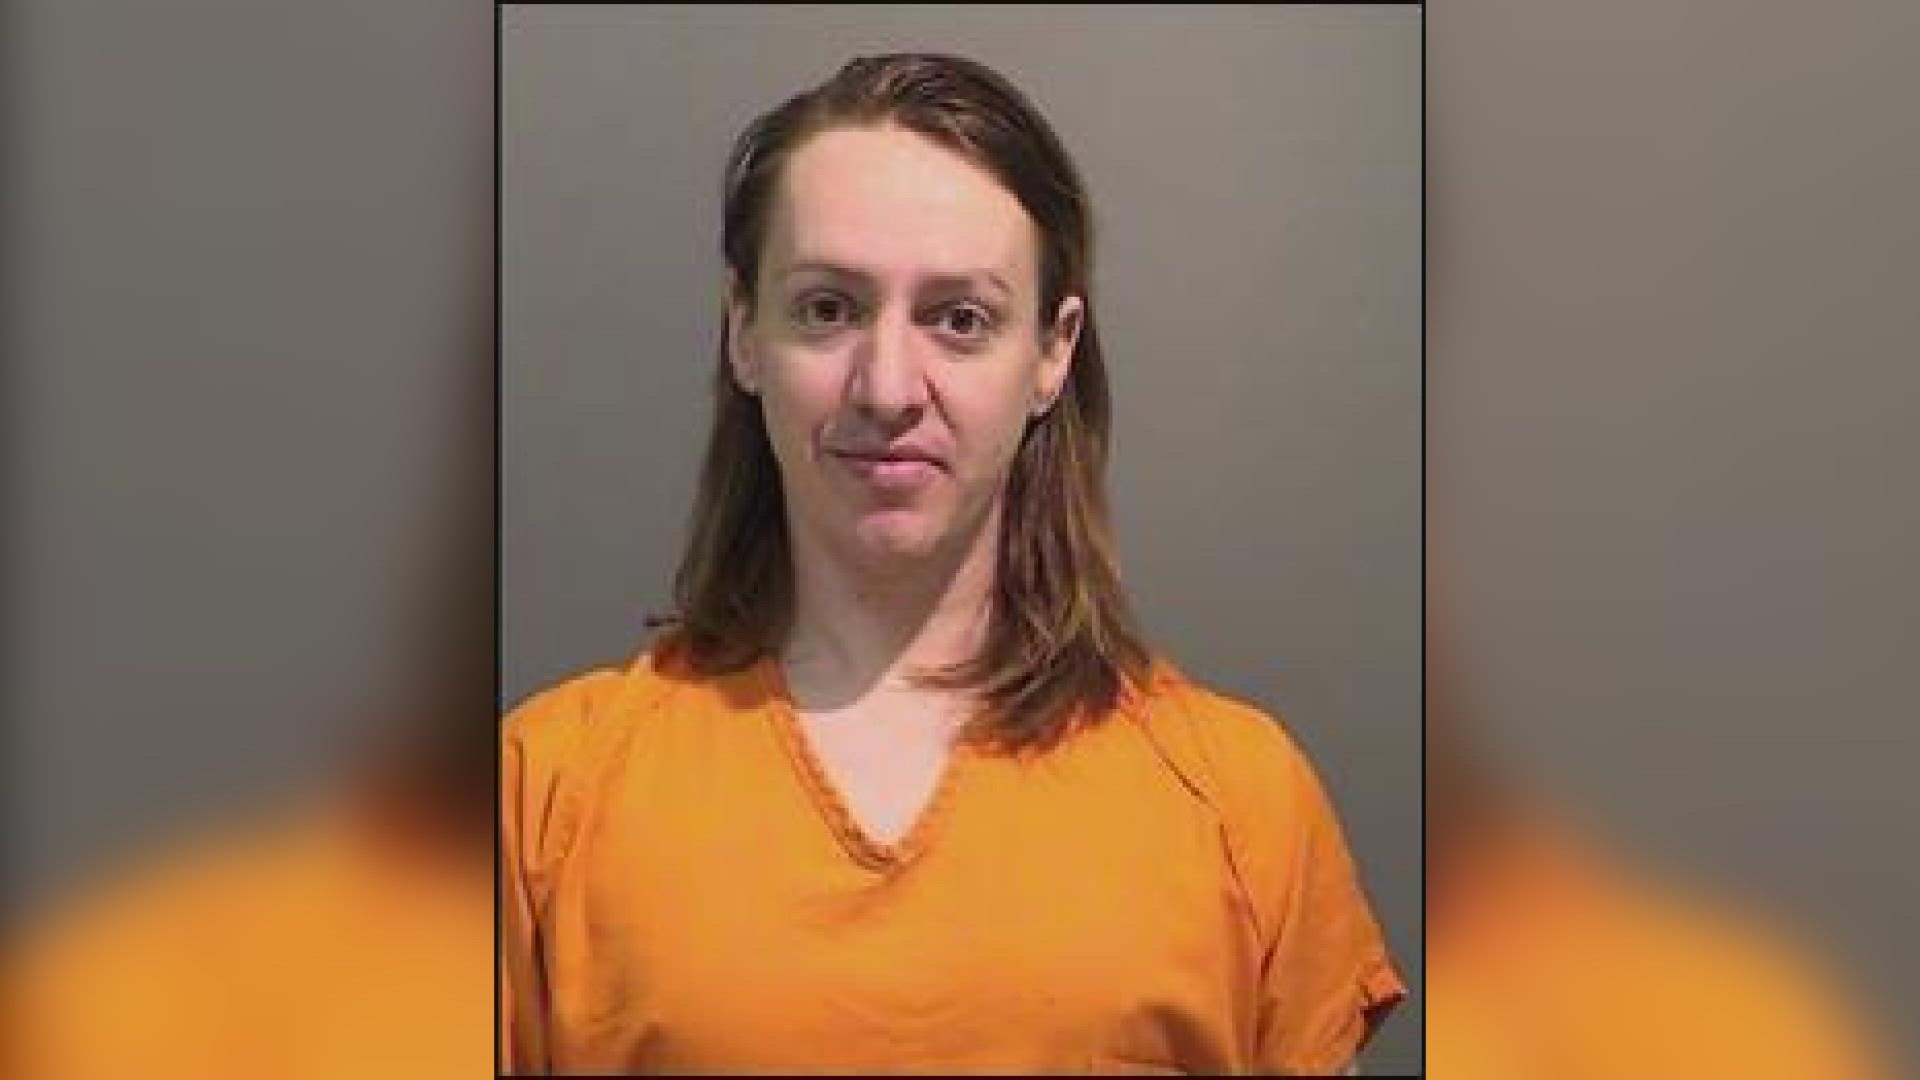 Haley Mill was wanted on multiple charges after two bicyclists were injured in the crash, including one victim who was seriously injured, the sheriff's office said.